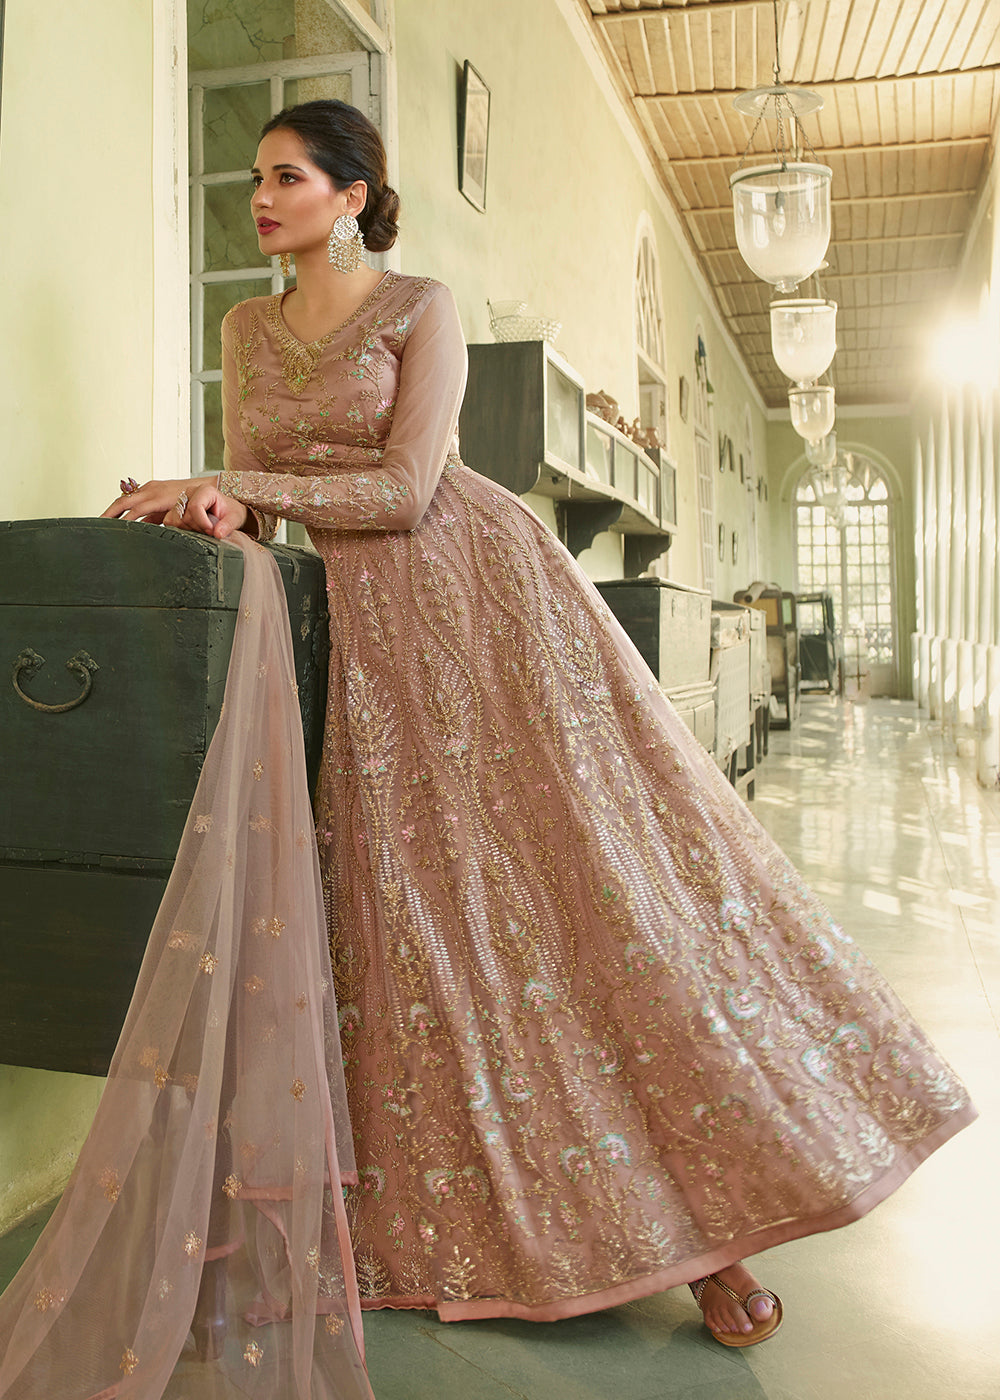 Buy Now Slit Style Captivating Peach Zari Embroidered Party Festive Anarkali Suit Online in USA, UK, Australia, New Zealand, Canada & Worldwide at Empress Clothing. 